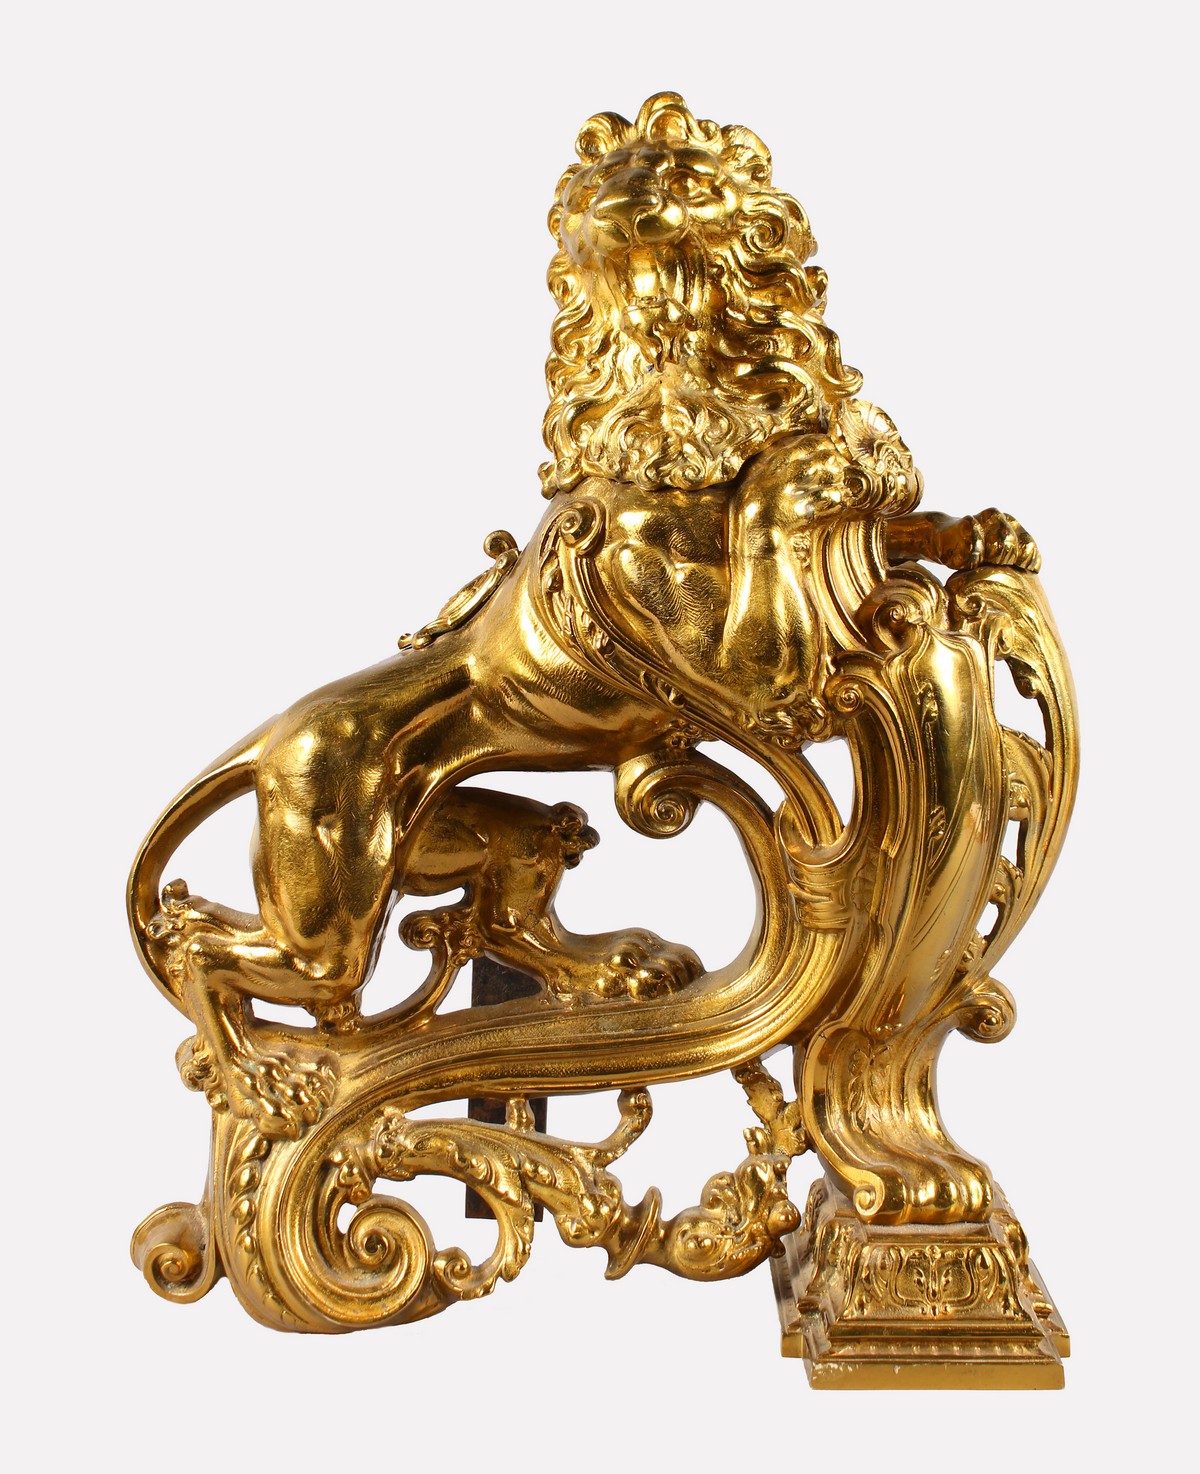 A SUPERB LARGE PAIR OF 18TH-19TH CENTURY FRENCH GILT BRONZE CHENETS of large imposing lions, along - Image 3 of 5